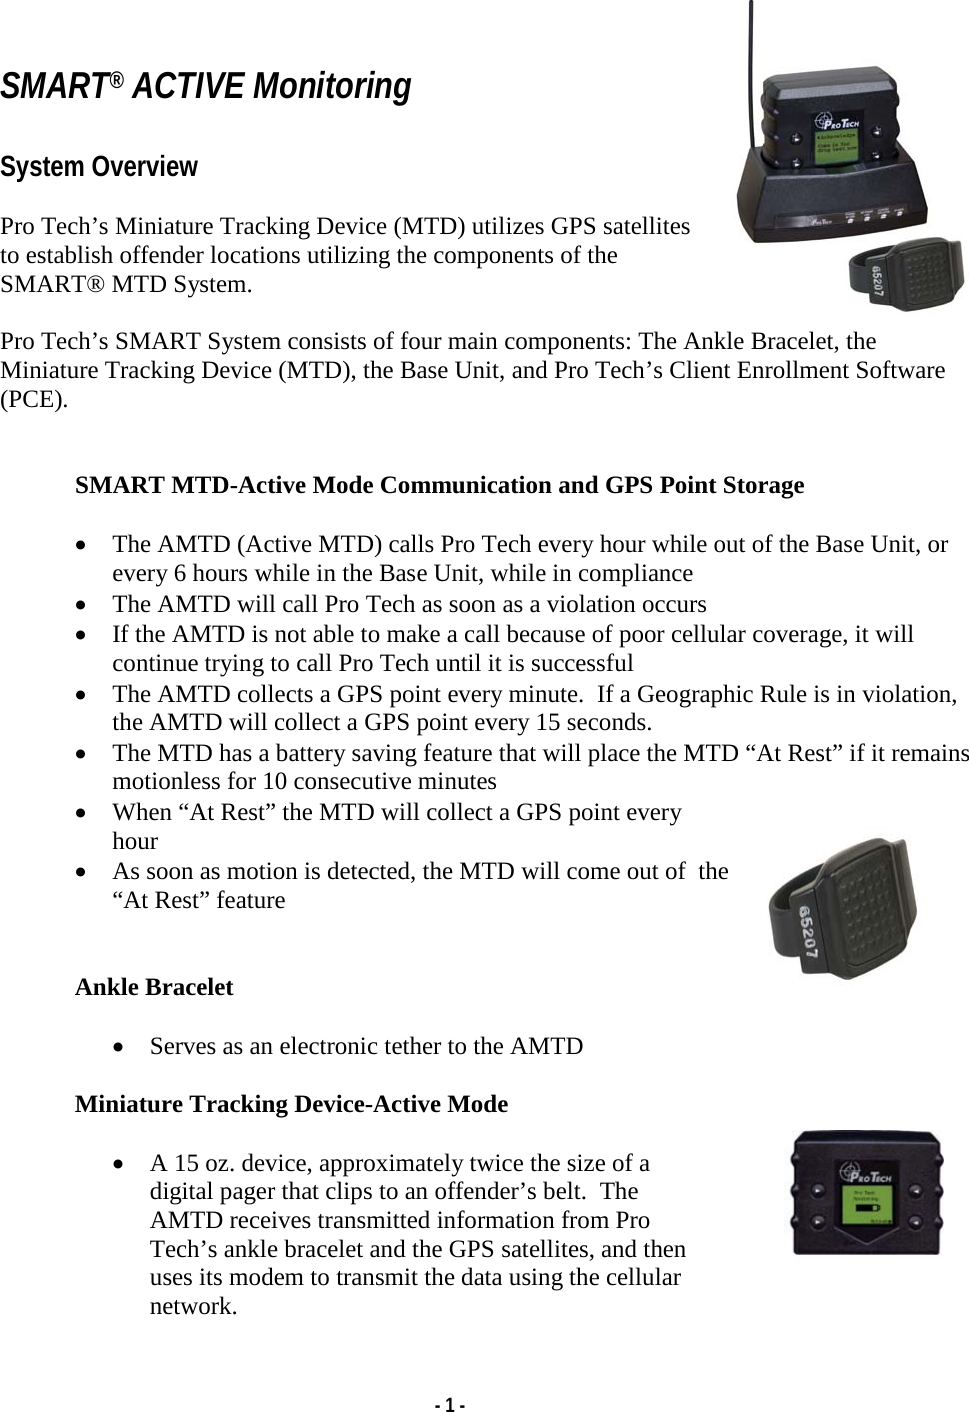   - 1 -   SMART® ACTIVE Monitoring  System Overview  Pro Tech’s Miniature Tracking Device (MTD) utilizes GPS satellites to establish offender locations utilizing the components of the SMART® MTD System.  Pro Tech’s SMART System consists of four main components: The Ankle Bracelet, the Miniature Tracking Device (MTD), the Base Unit, and Pro Tech’s Client Enrollment Software (PCE).   SMART MTD-Active Mode Communication and GPS Point Storage  • The AMTD (Active MTD) calls Pro Tech every hour while out of the Base Unit, or every 6 hours while in the Base Unit, while in compliance • The AMTD will call Pro Tech as soon as a violation occurs • If the AMTD is not able to make a call because of poor cellular coverage, it will continue trying to call Pro Tech until it is successful • The AMTD collects a GPS point every minute.  If a Geographic Rule is in violation, the AMTD will collect a GPS point every 15 seconds. • The MTD has a battery saving feature that will place the MTD “At Rest” if it remains motionless for 10 consecutive minutes • When “At Rest” the MTD will collect a GPS point every hour • As soon as motion is detected, the MTD will come out of  the “At Rest” feature   Ankle Bracelet  • Serves as an electronic tether to the AMTD  Miniature Tracking Device-Active Mode  • A 15 oz. device, approximately twice the size of a digital pager that clips to an offender’s belt.  The AMTD receives transmitted information from Pro Tech’s ankle bracelet and the GPS satellites, and then uses its modem to transmit the data using the cellular network. 